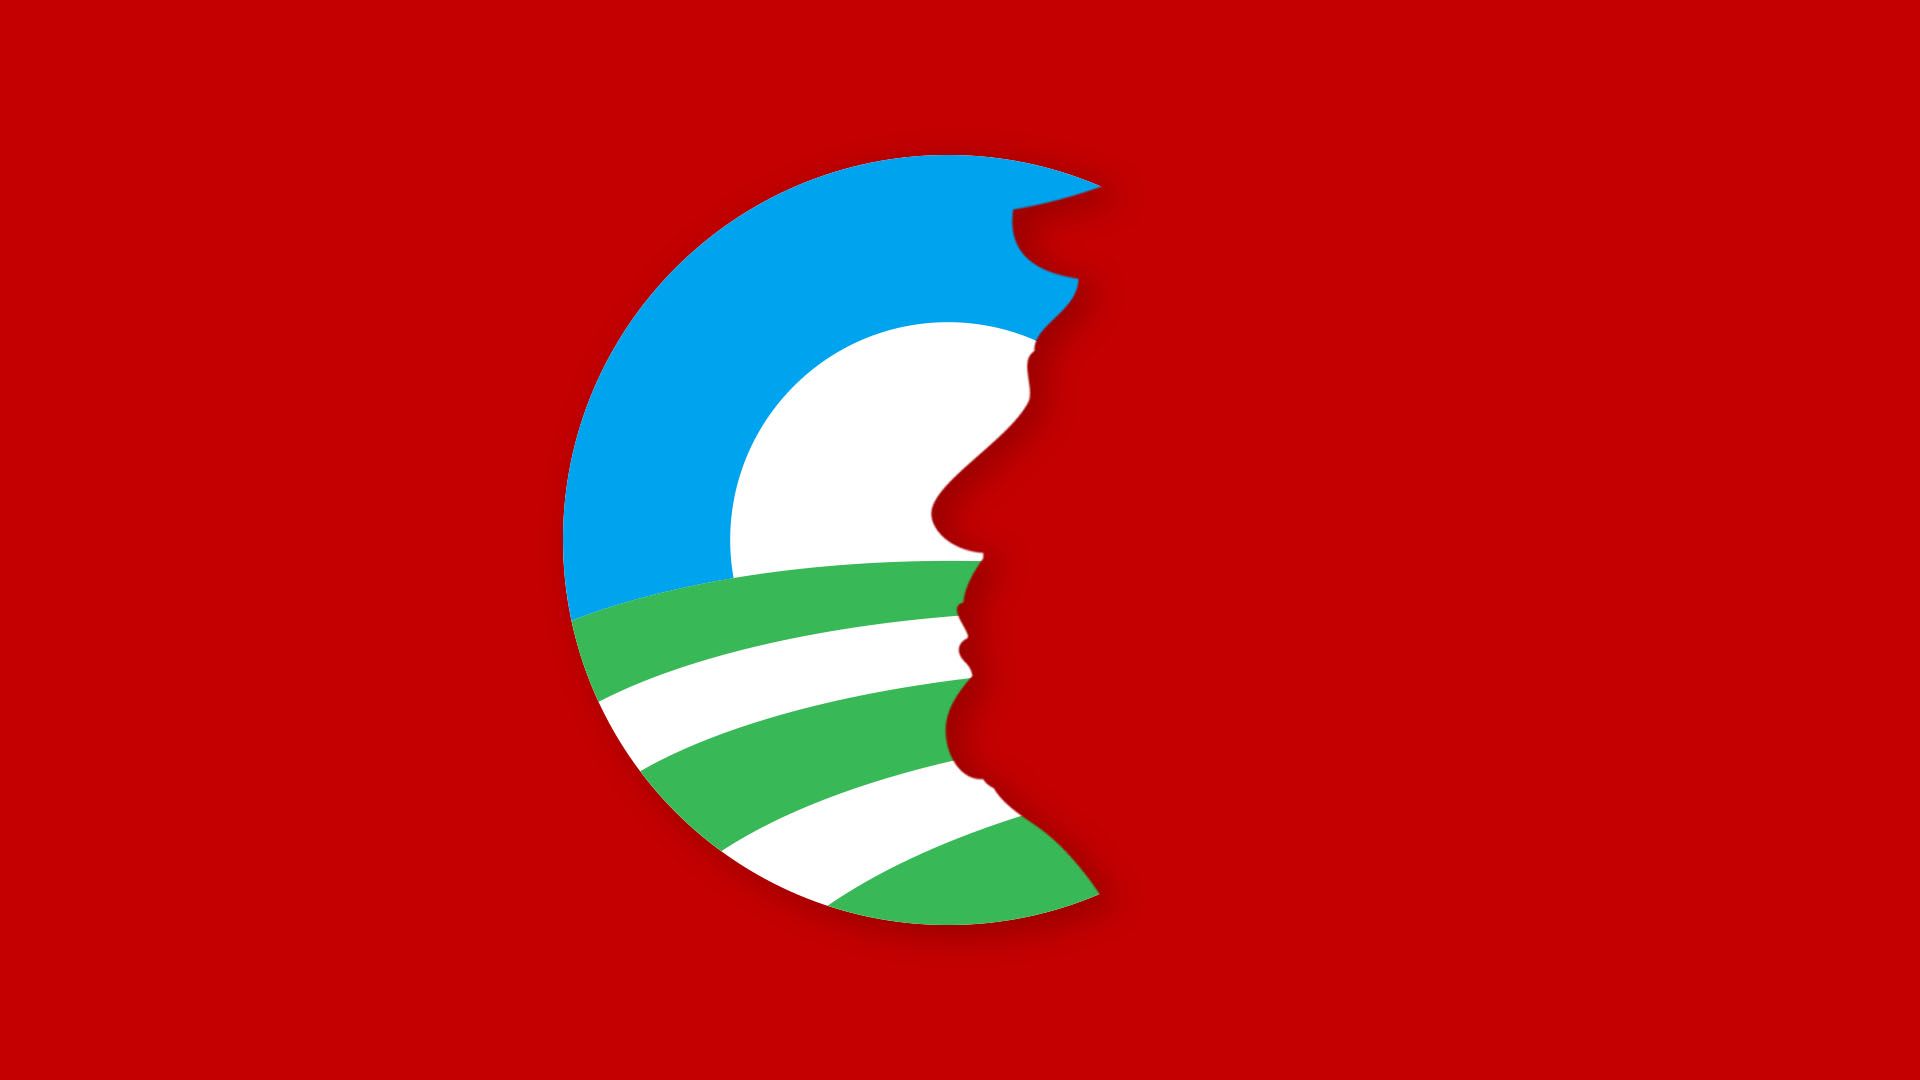 Illustration of green Obama logo with a cutout in the shape of Trump's face